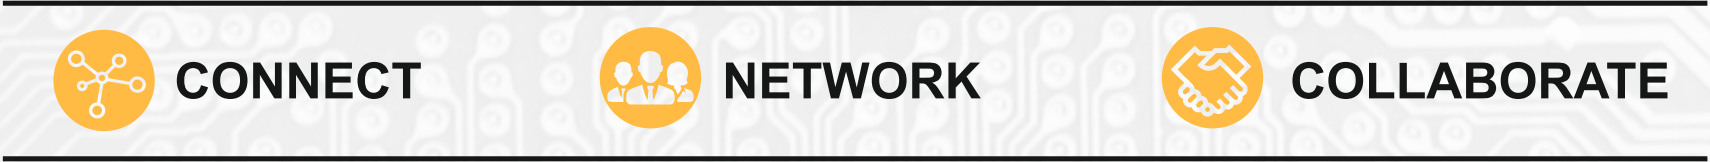 connect network collaborate